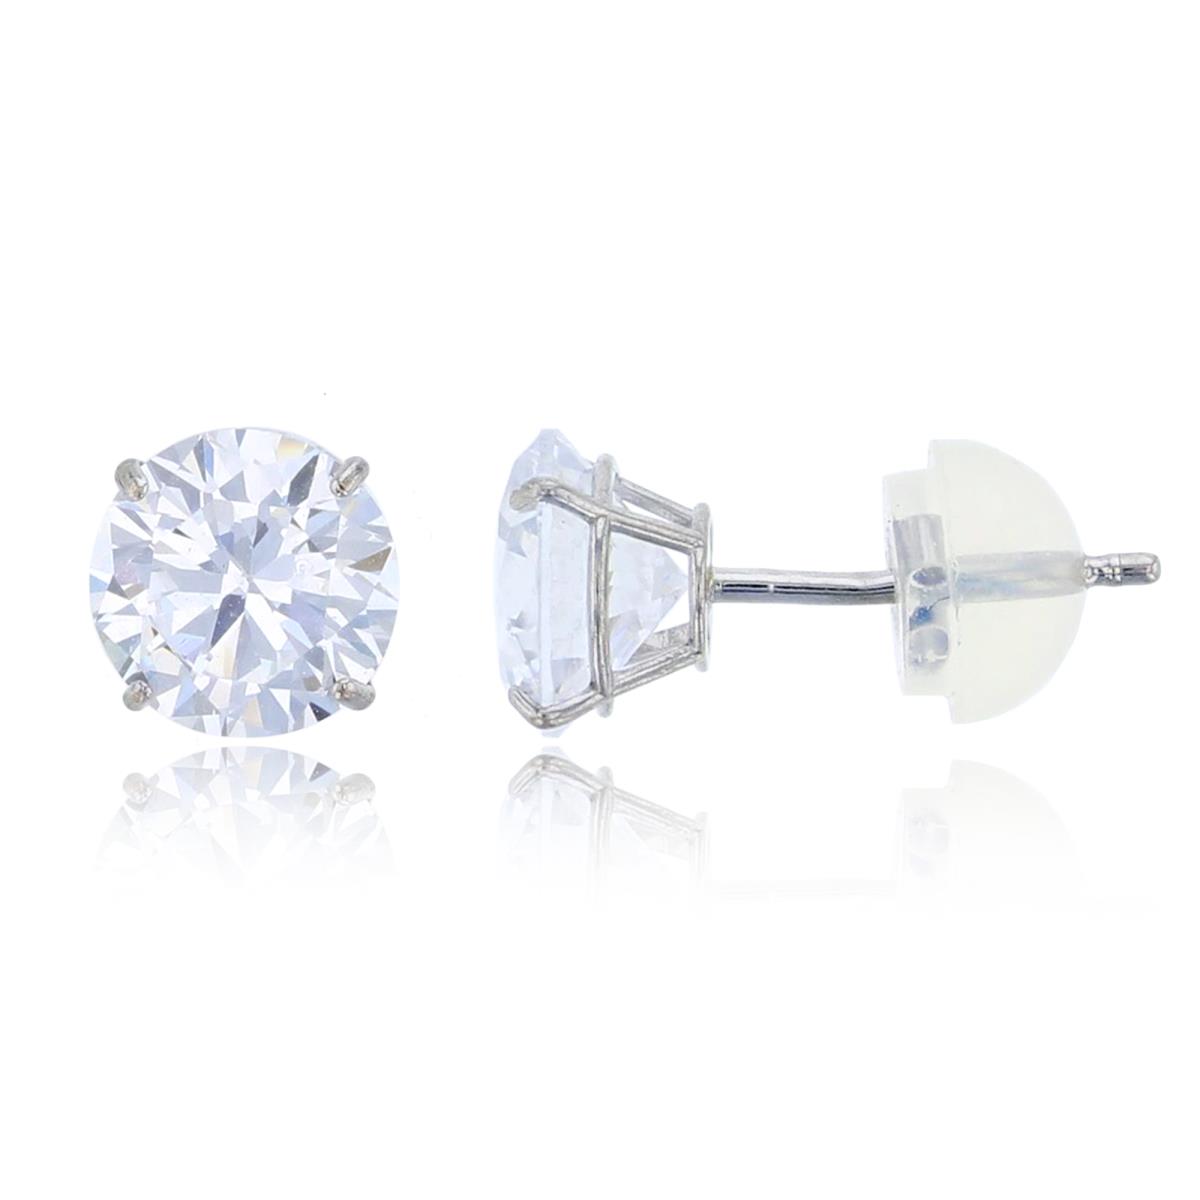 14K White Gold 6mm Round Cut Solitaire Stud Earring